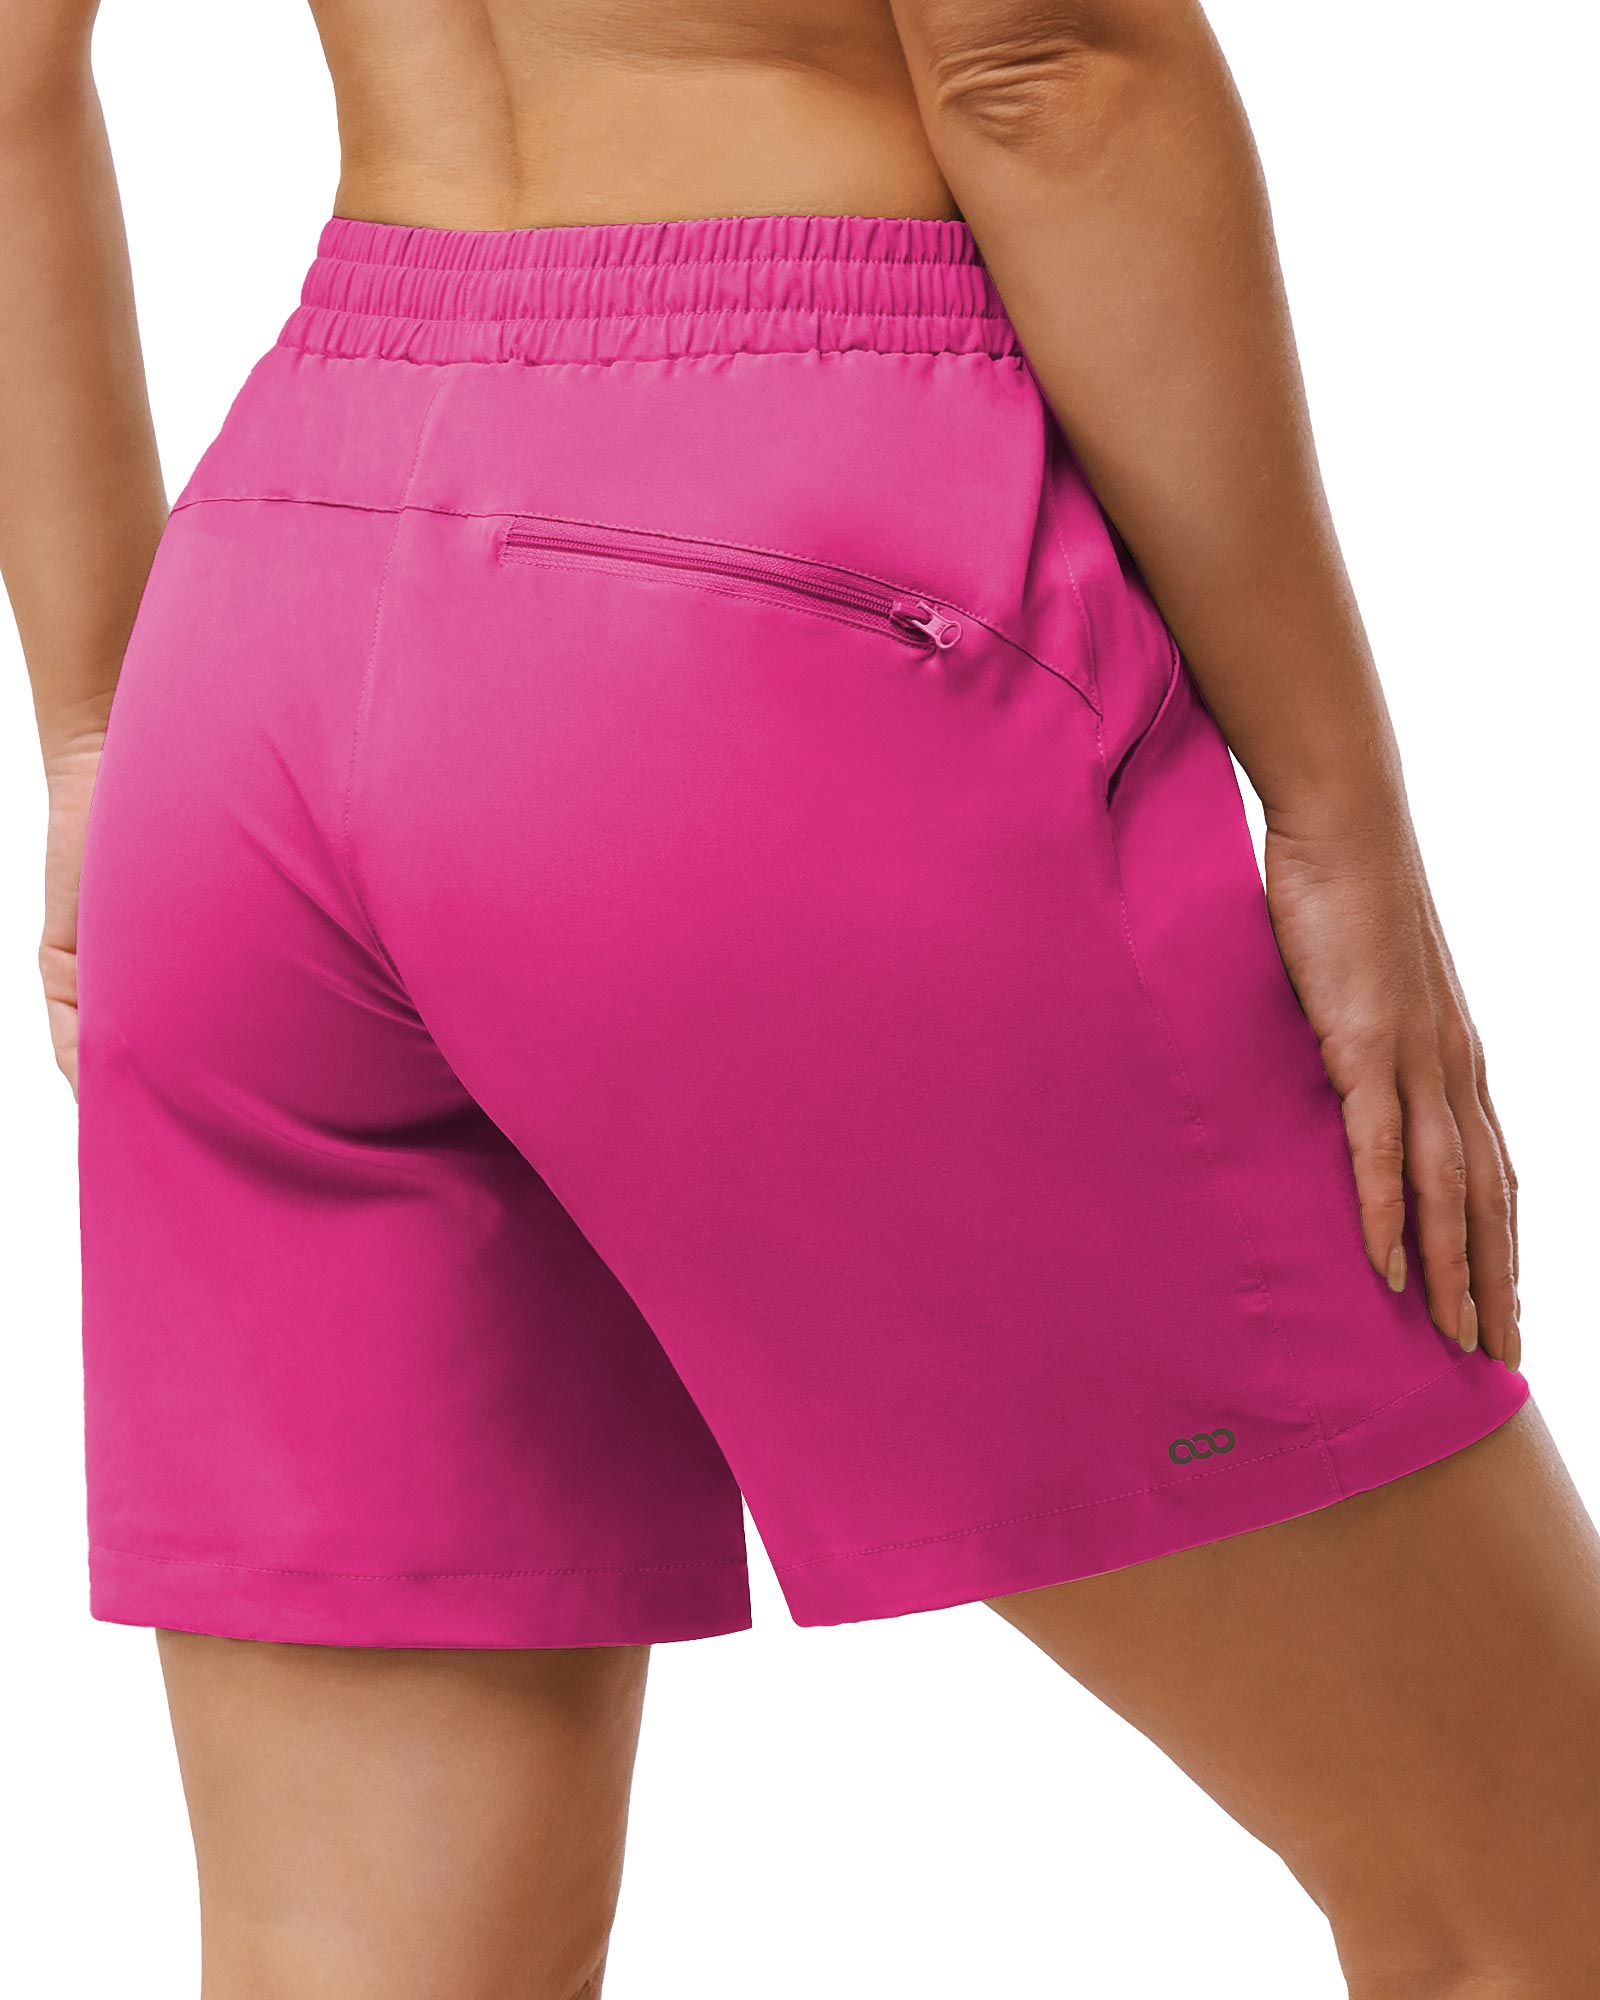 MeetHoo Women's Golf Hiking Shorts 4-5 Quick Dry Athletic Casual